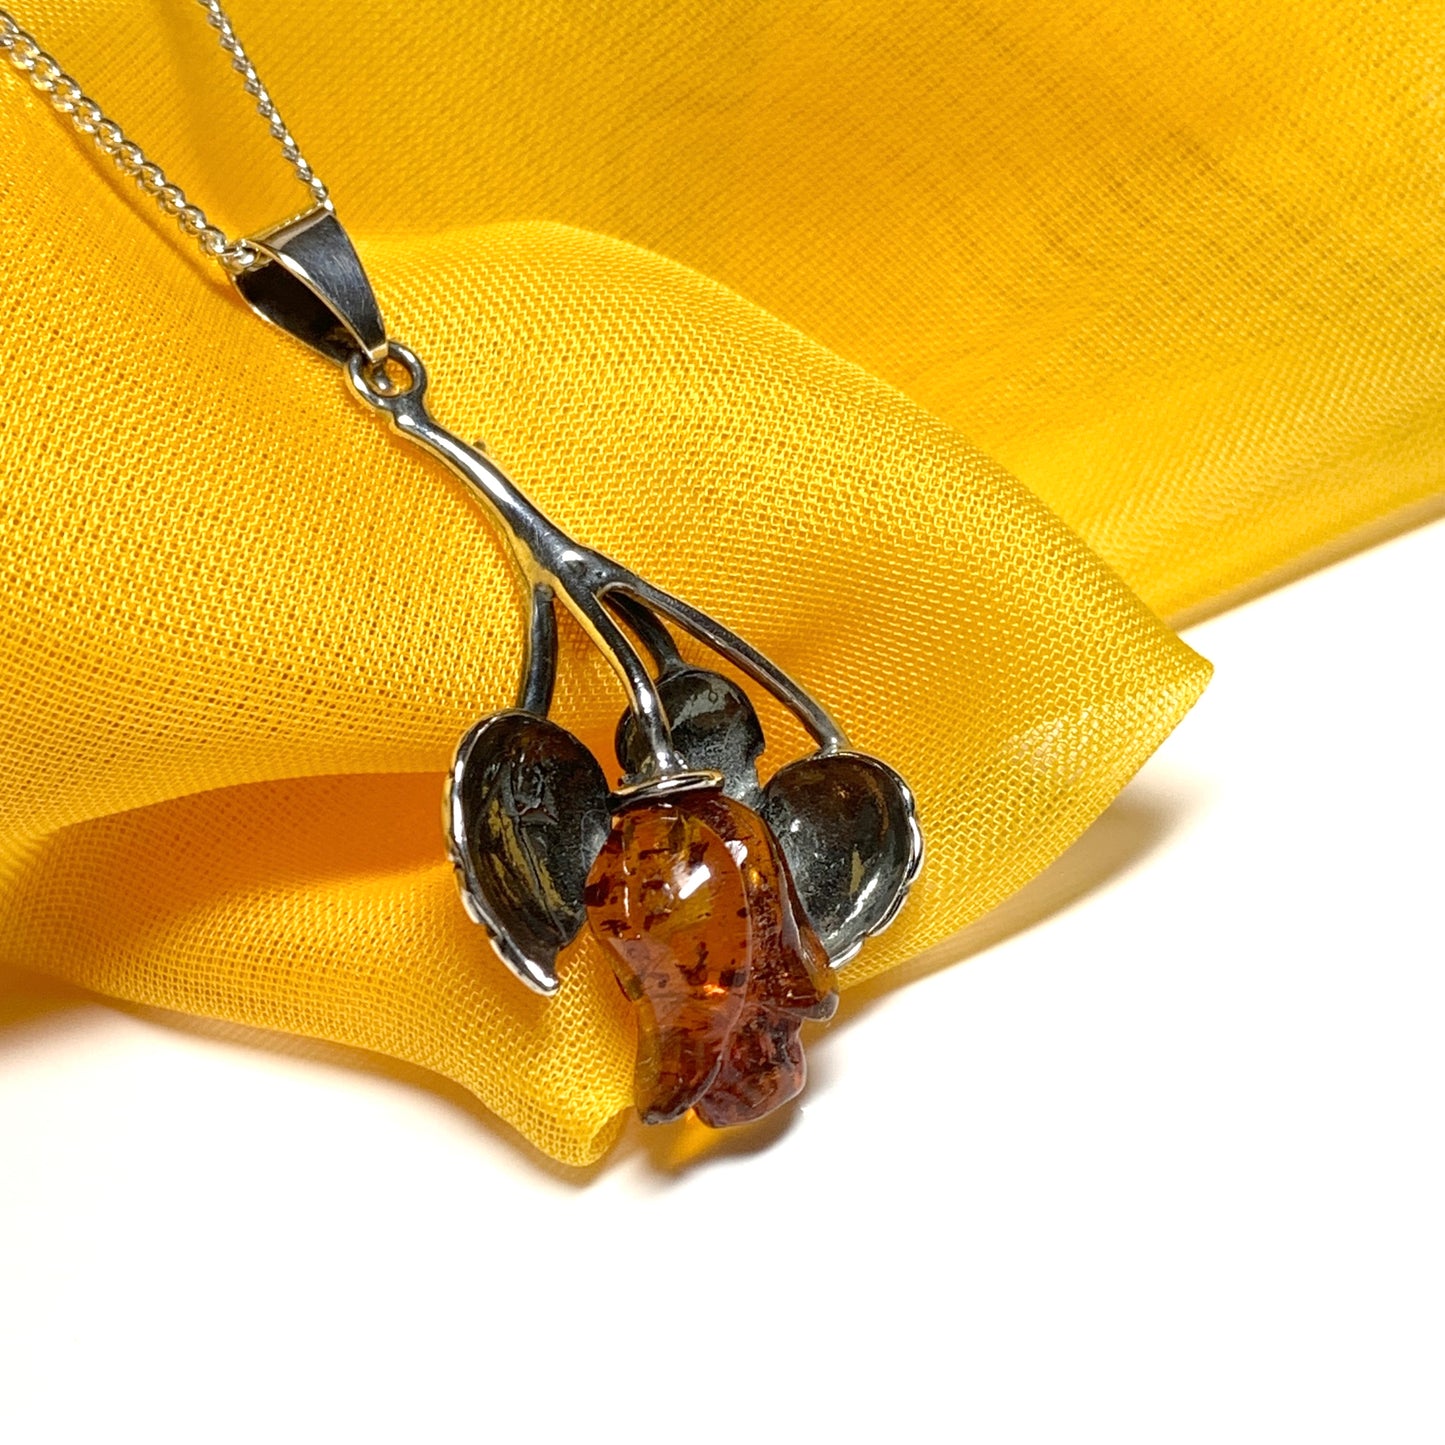 Amber rose shaped necklace sterling silver